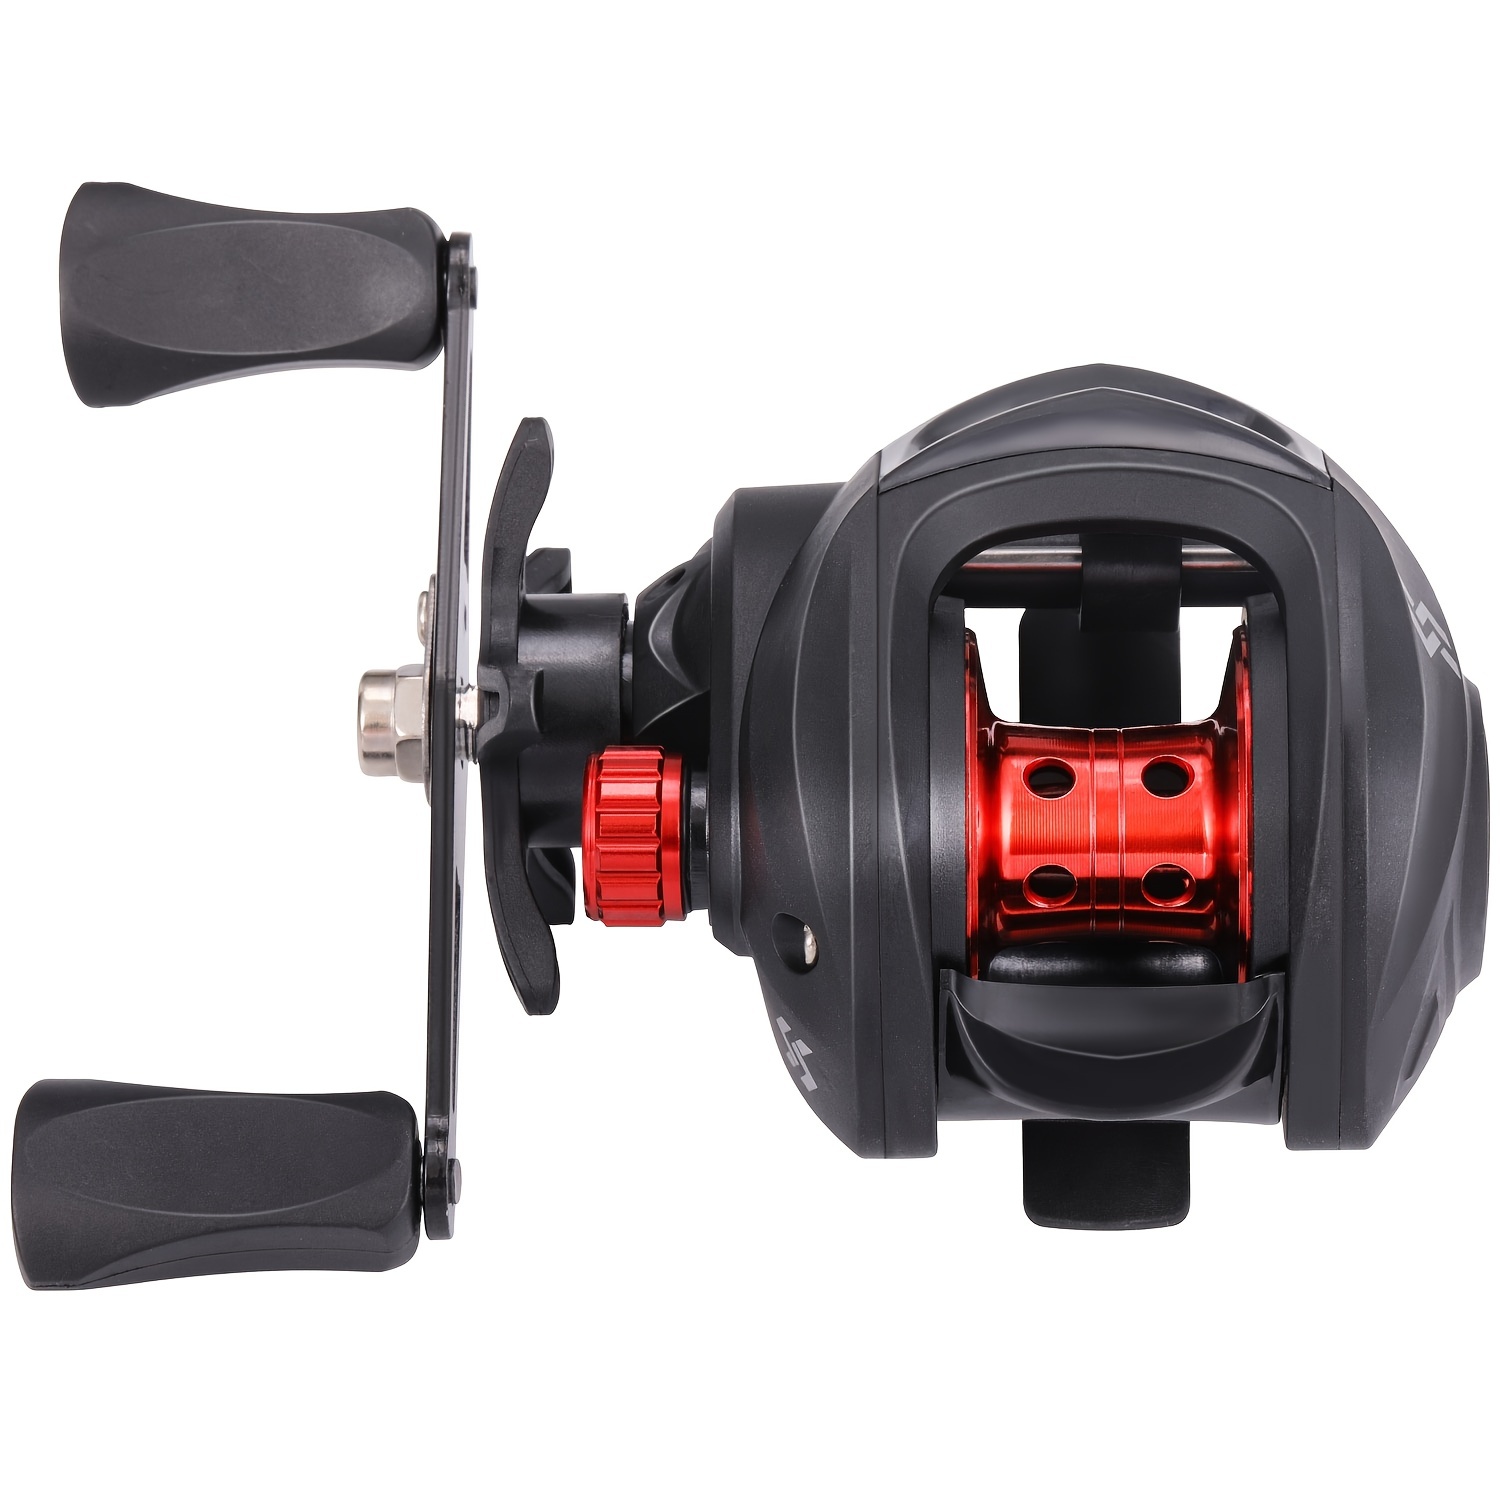 2000 Series Aluminum Alloy Knob Catfish Reels Handle For Baitcasting Single  Tackle Tool With Left And Right Hand Options From Tuiyunzhang, $23.32